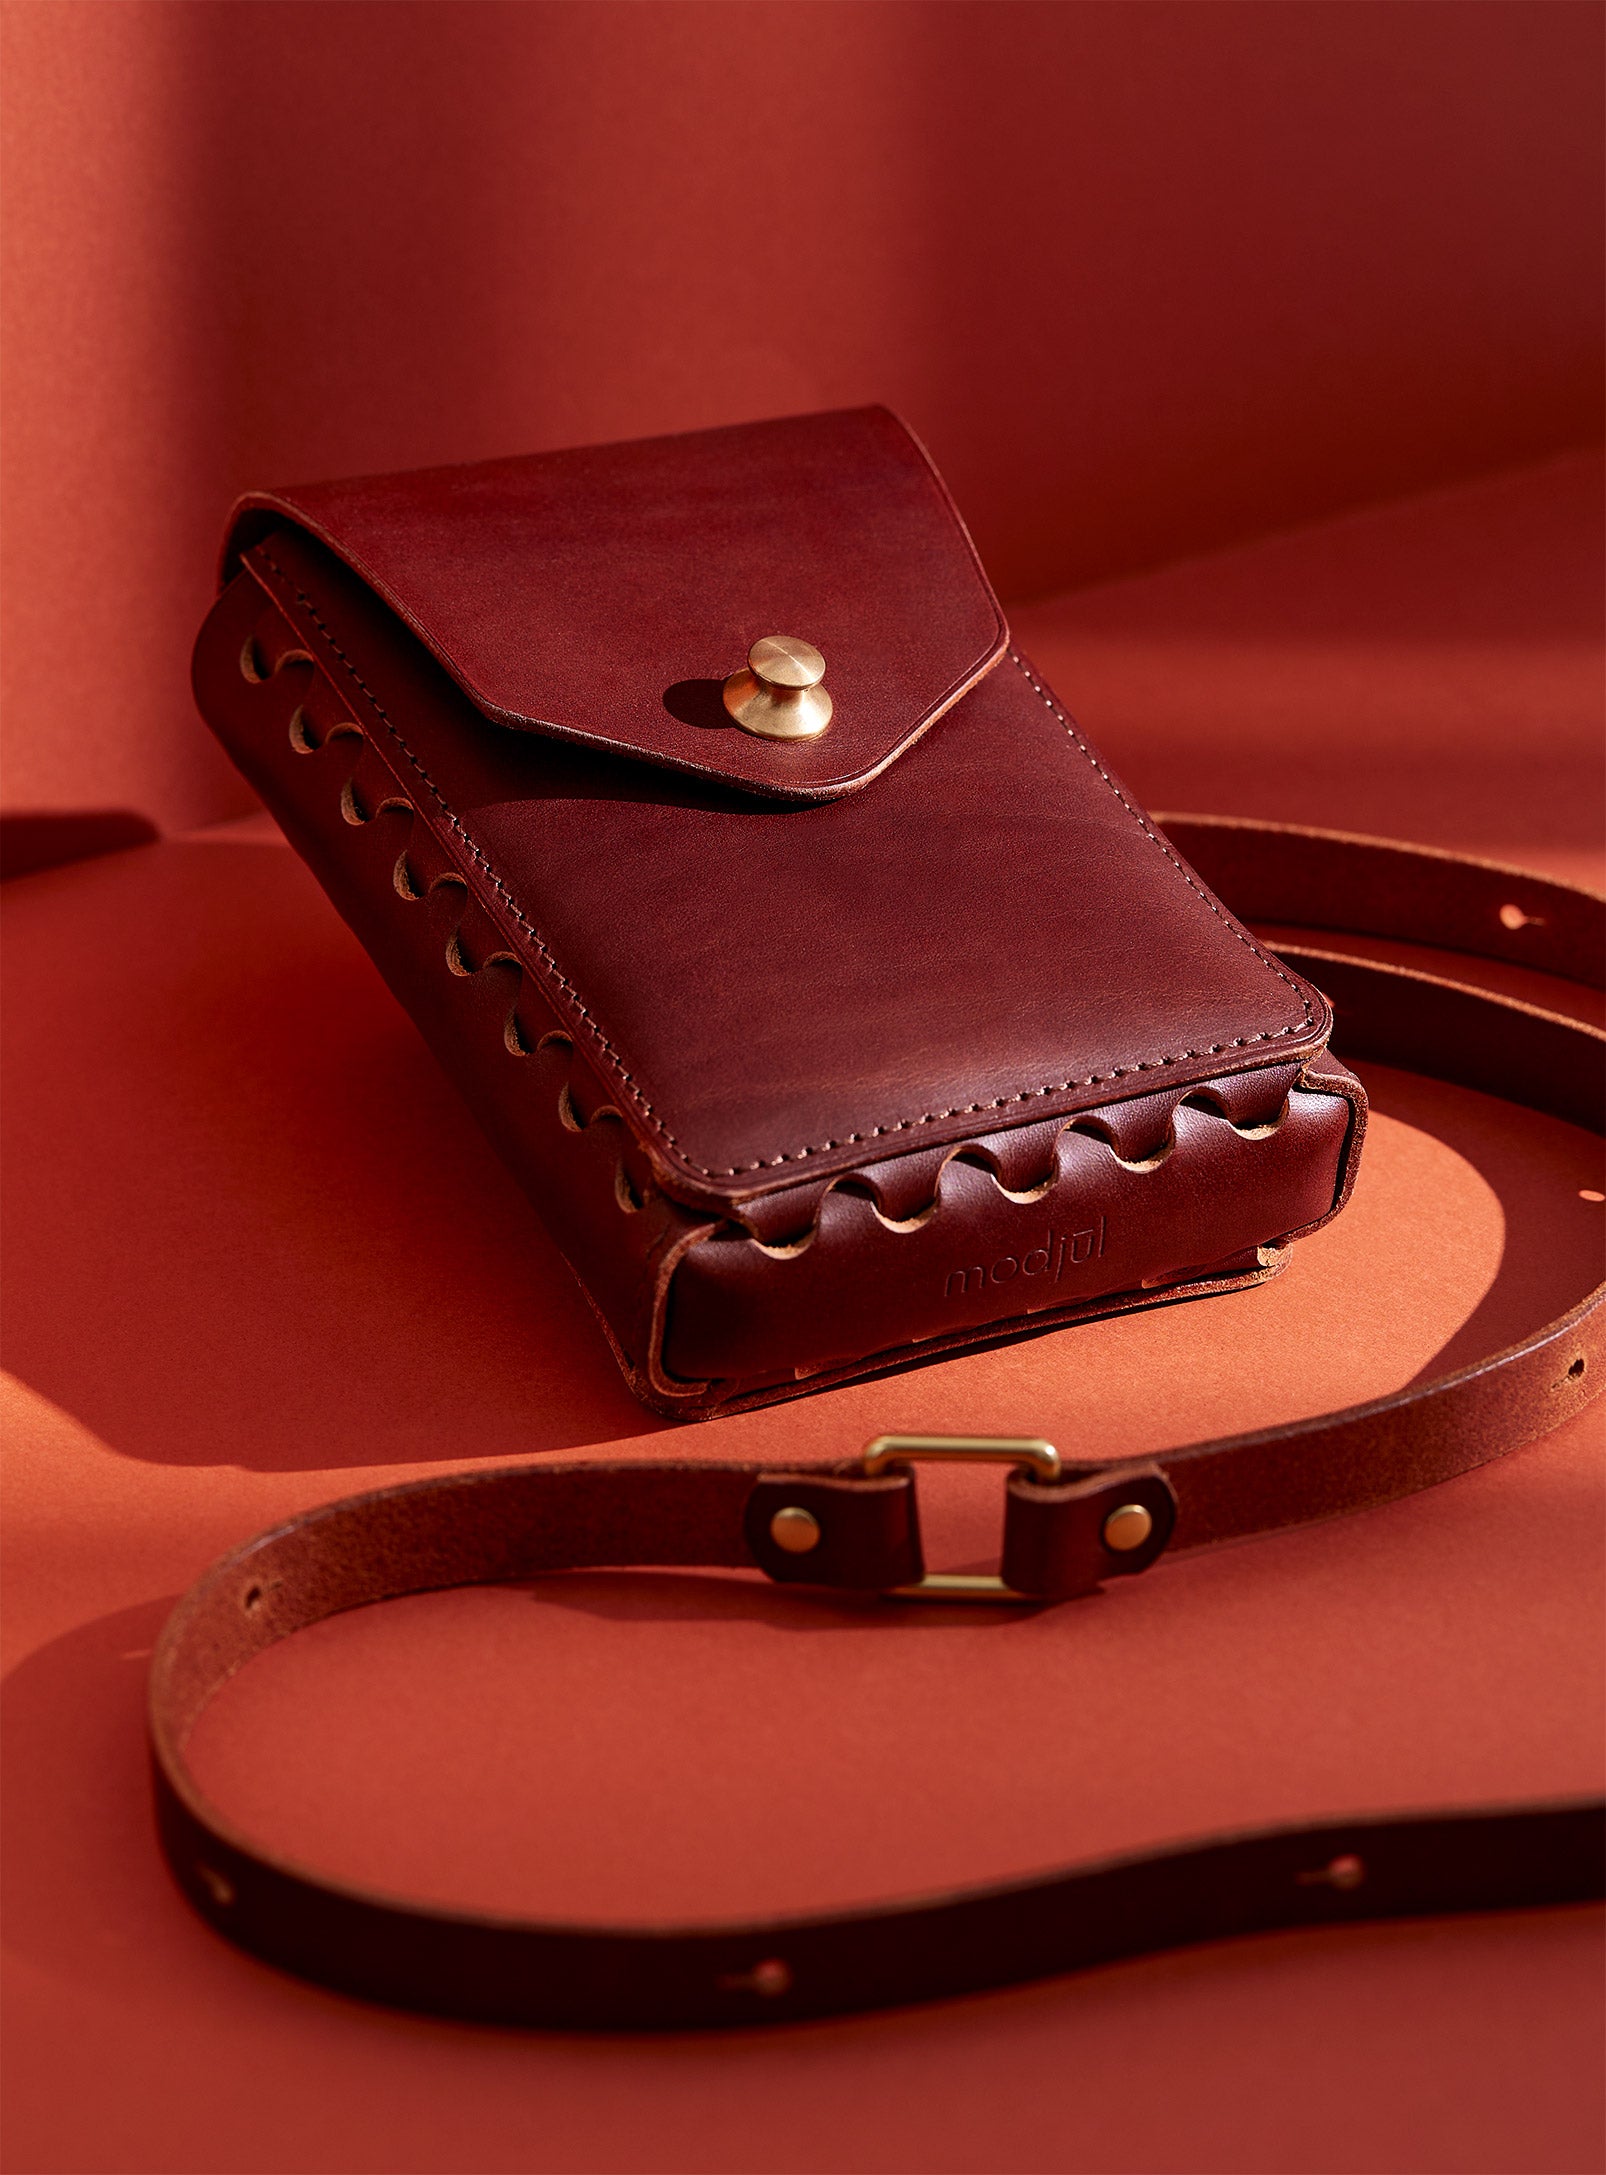 modjūl's capsule leather bag in brown. A rectangular-shaped bag with long straps, perfect for a phone.